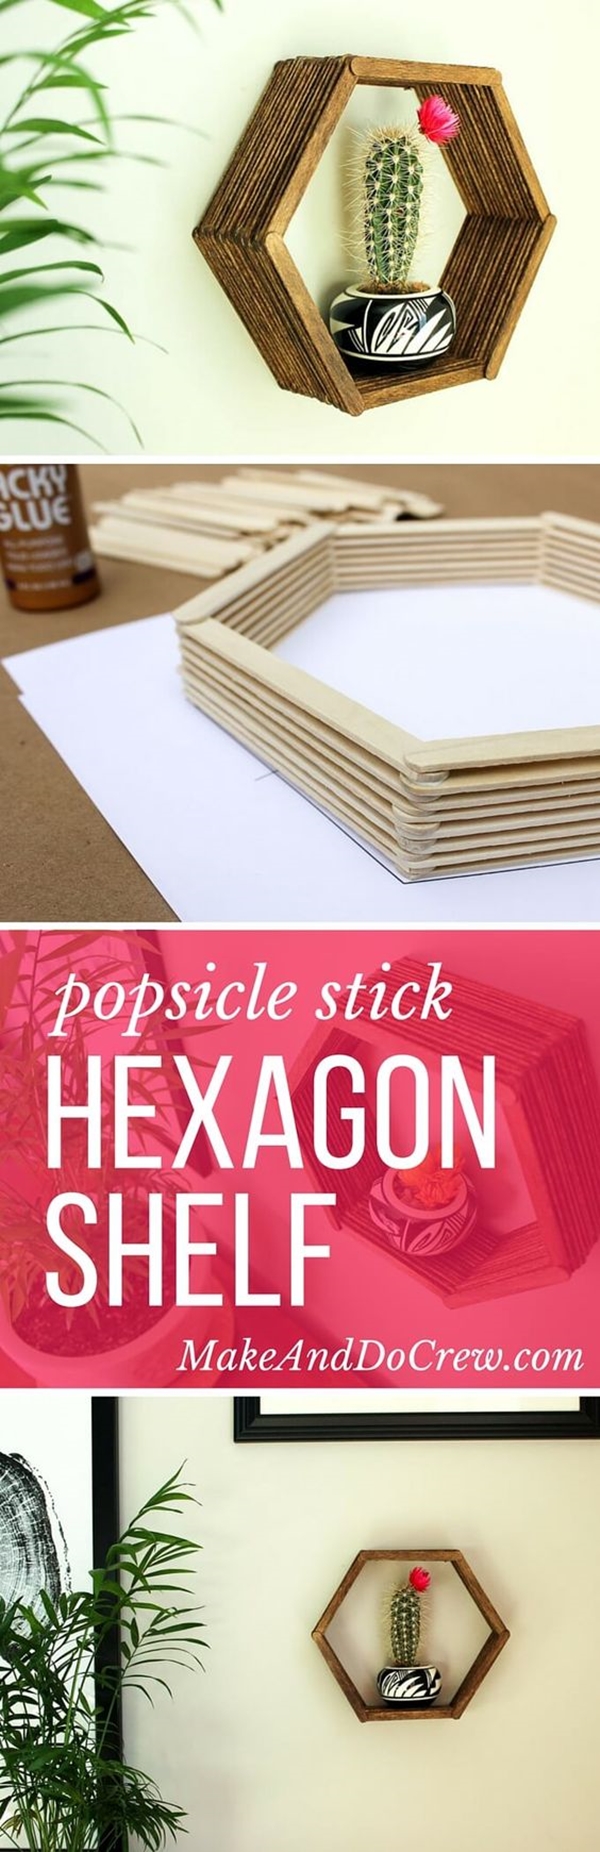 Amazing Popsicle Stick Crafts and Projects - (4)